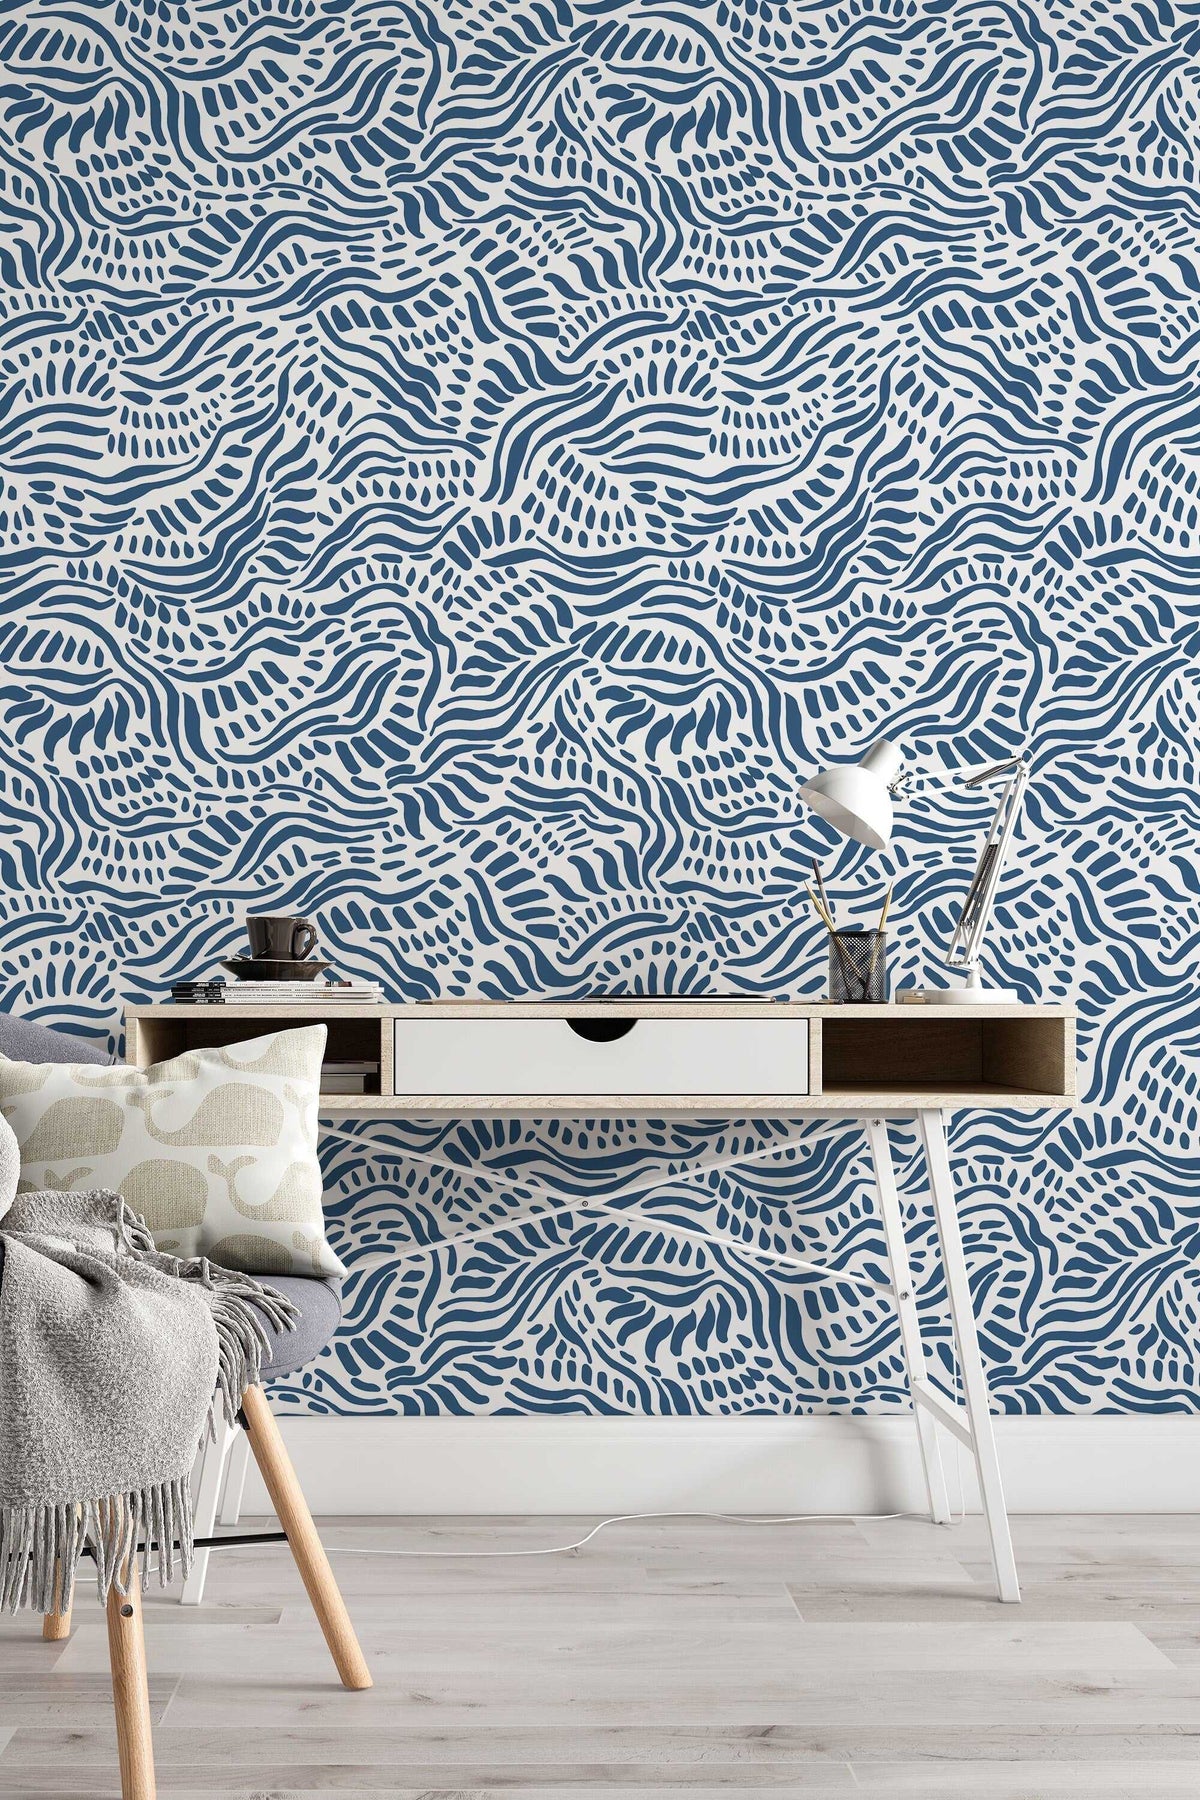 Chinese waves removable wallpaper  Nautical interior decor  Livettes